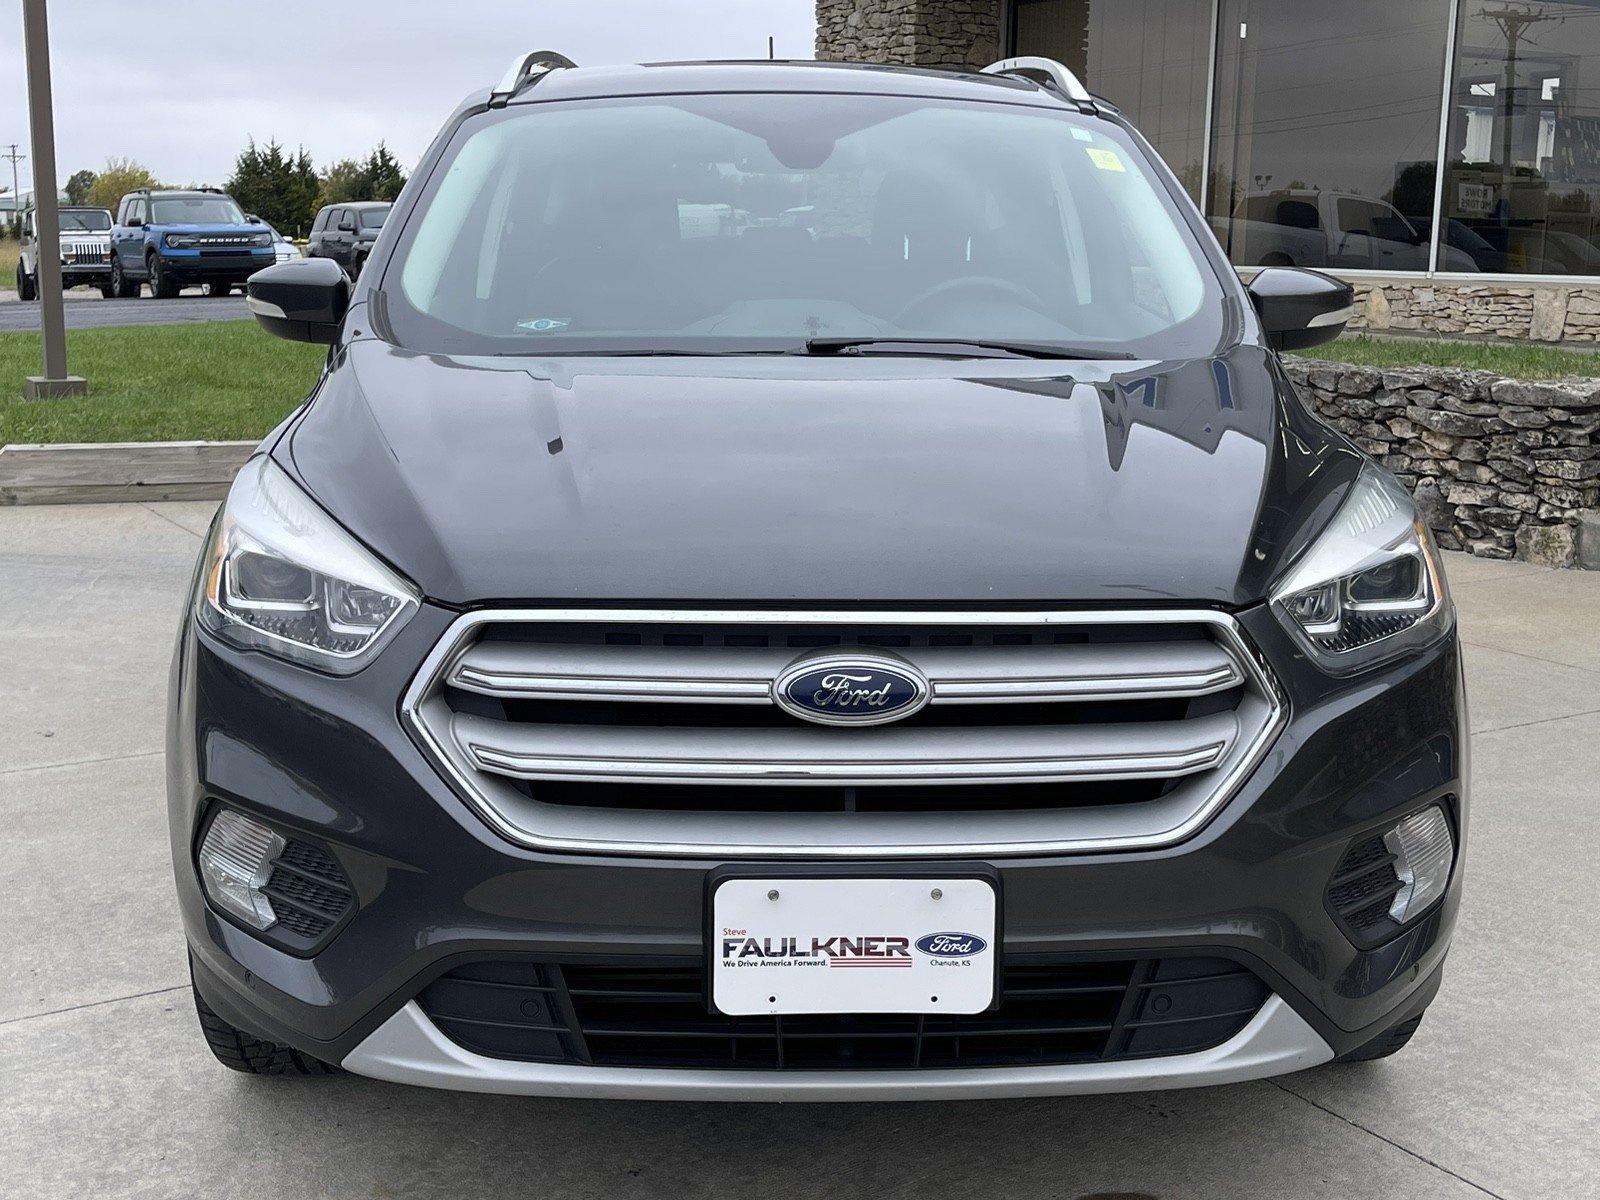 Used 2018 Ford Escape Titanium with VIN 1FMCU0J96JUA49479 for sale in Chanute, KS